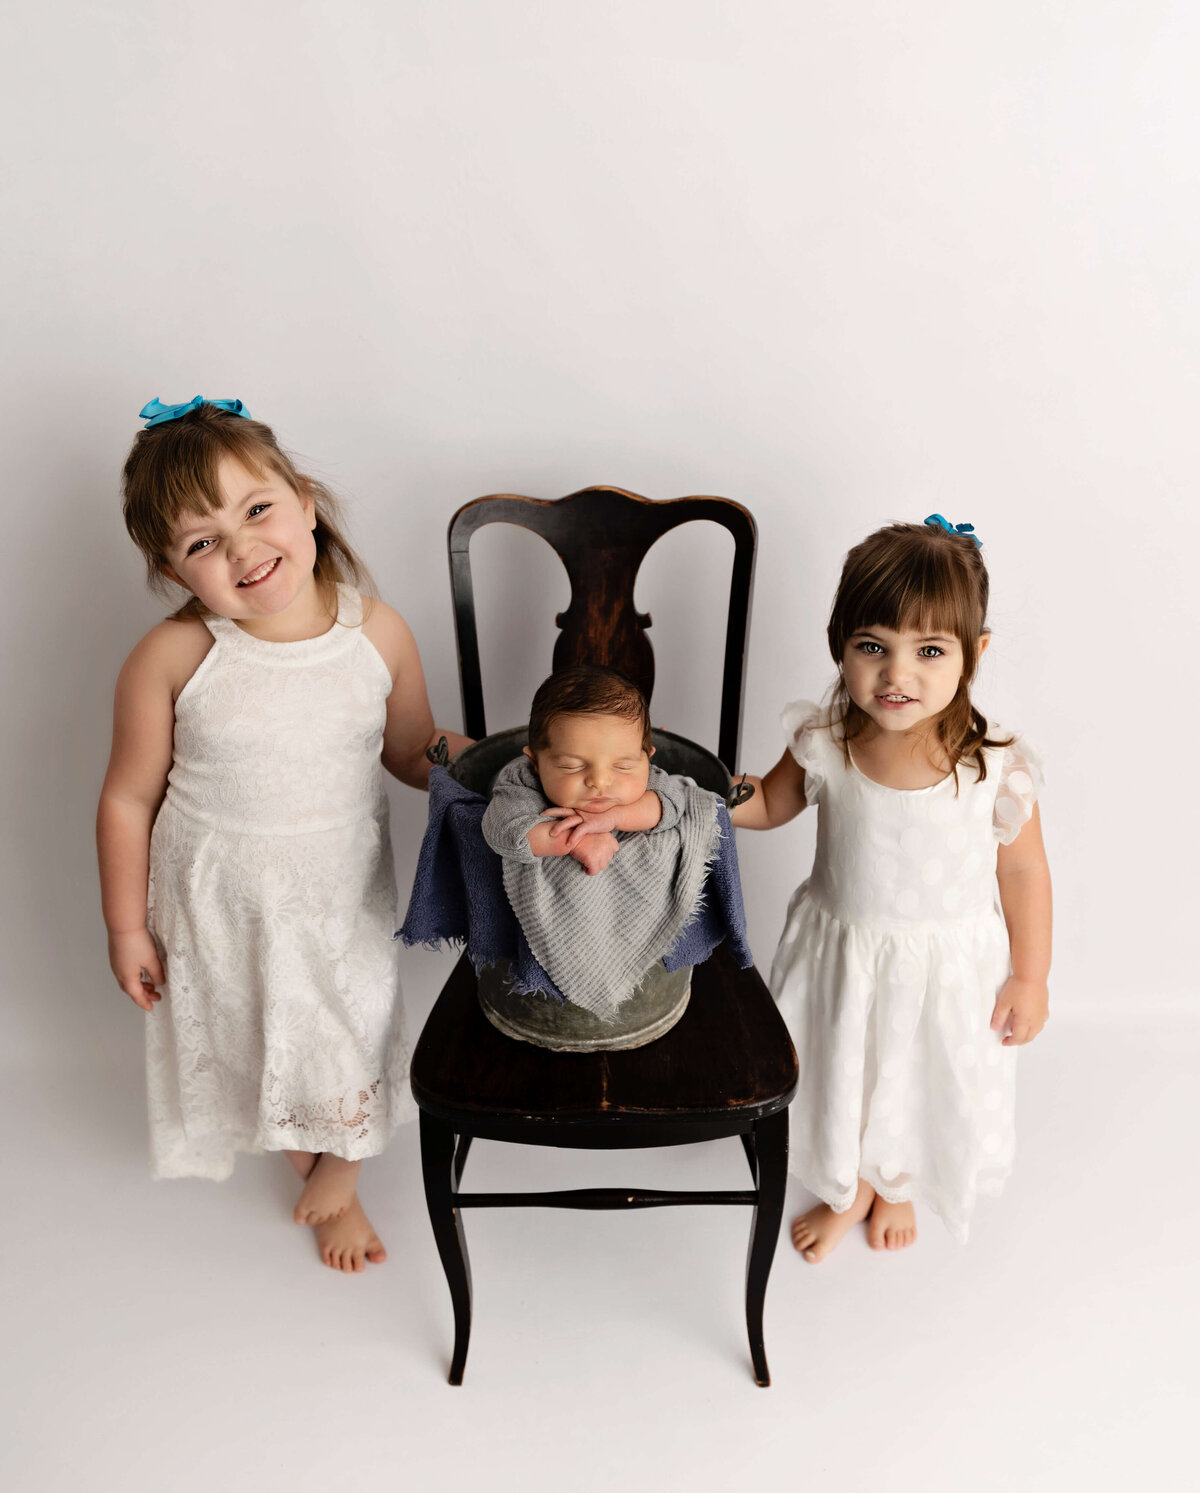 Newborn photo of a baby boy with sisters in an Erie Pa photography studio